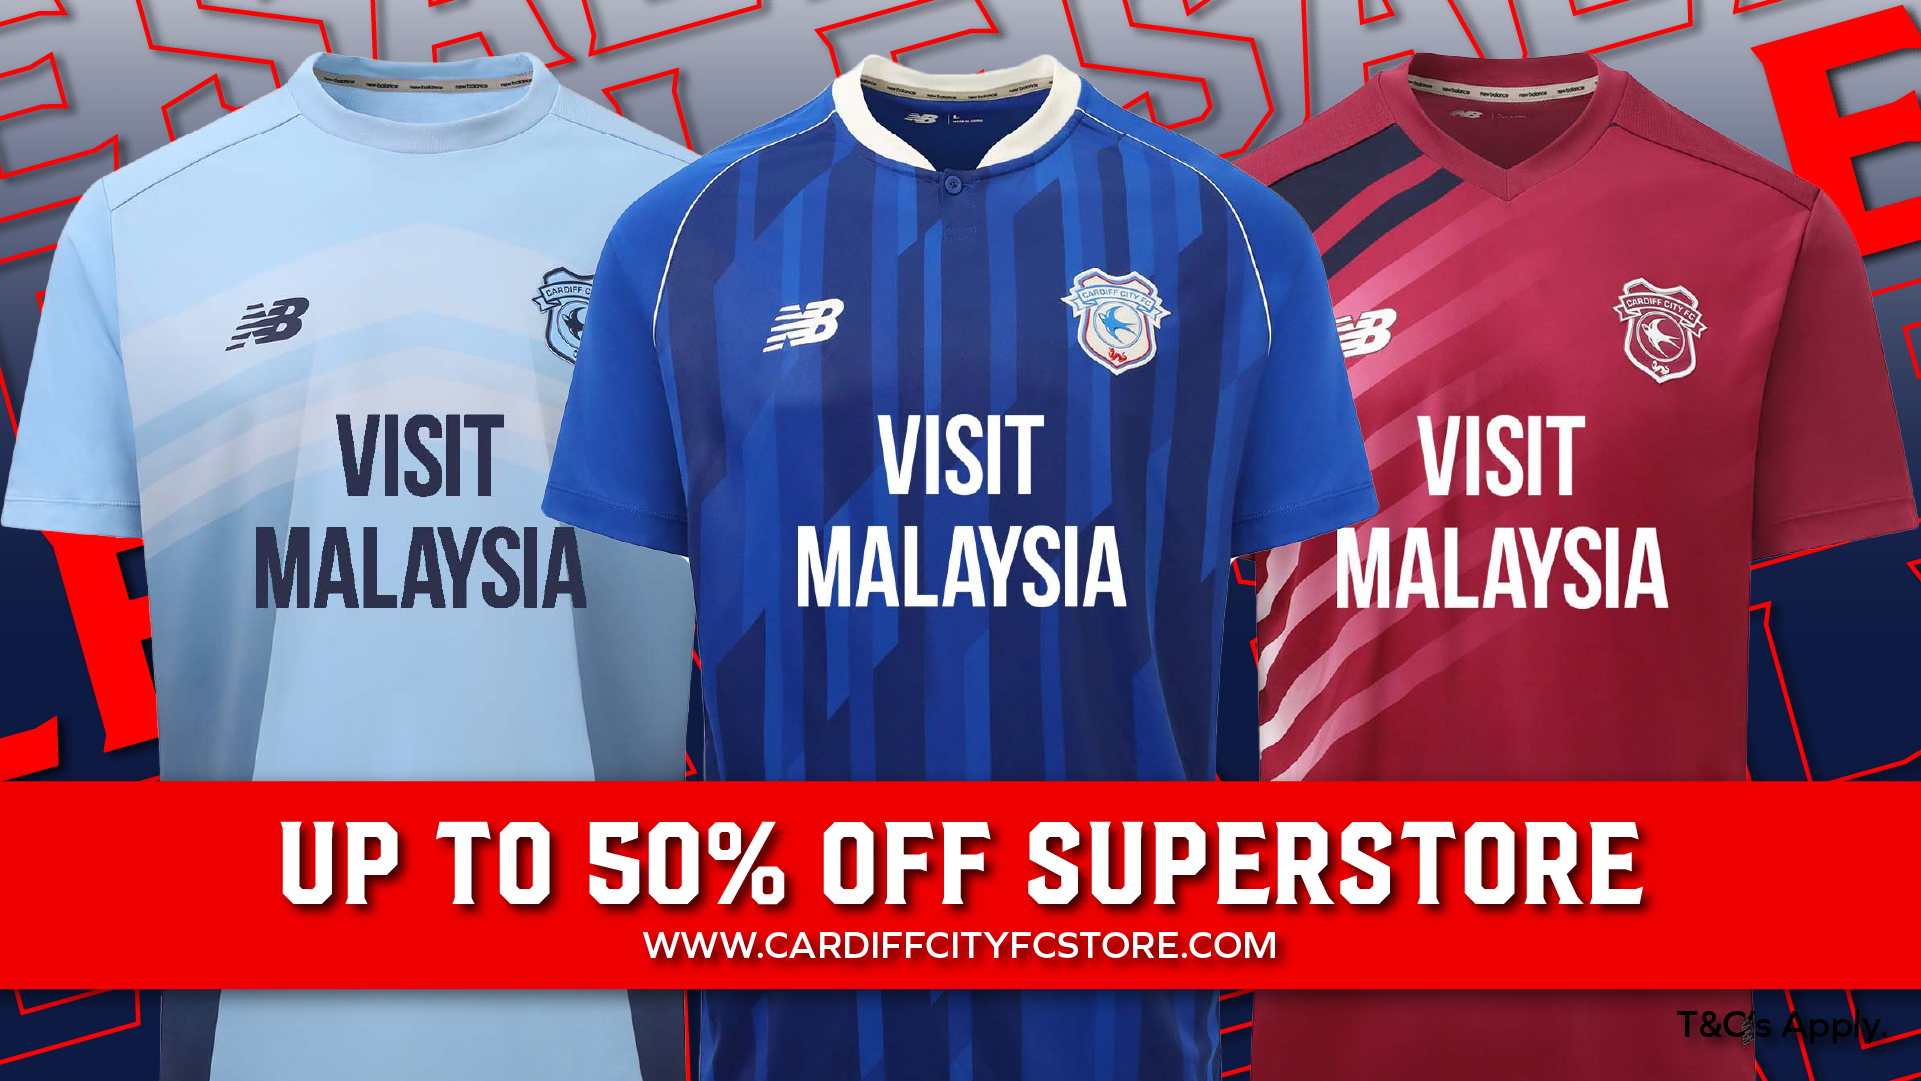 Cardiff City FC Superstore sale